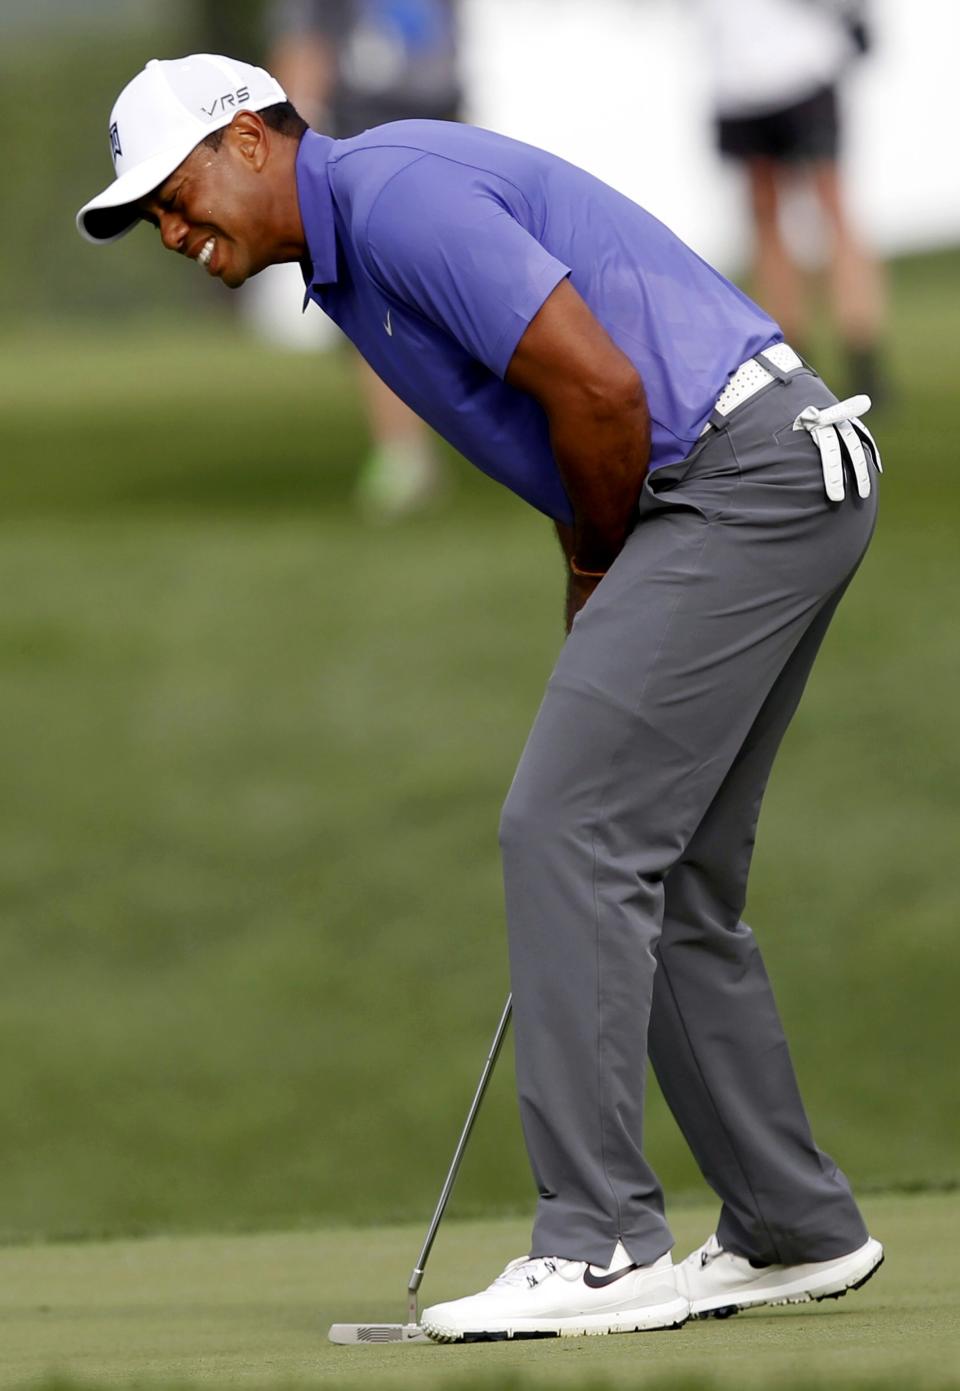 Tiger Woods of the U.S. reacts after a missed putt on the 10th green during the first round of the PGA Championship at Valhalla Golf Club in Louisville, Kentucky, August 7, 2014. REUTERS/John Sommers II